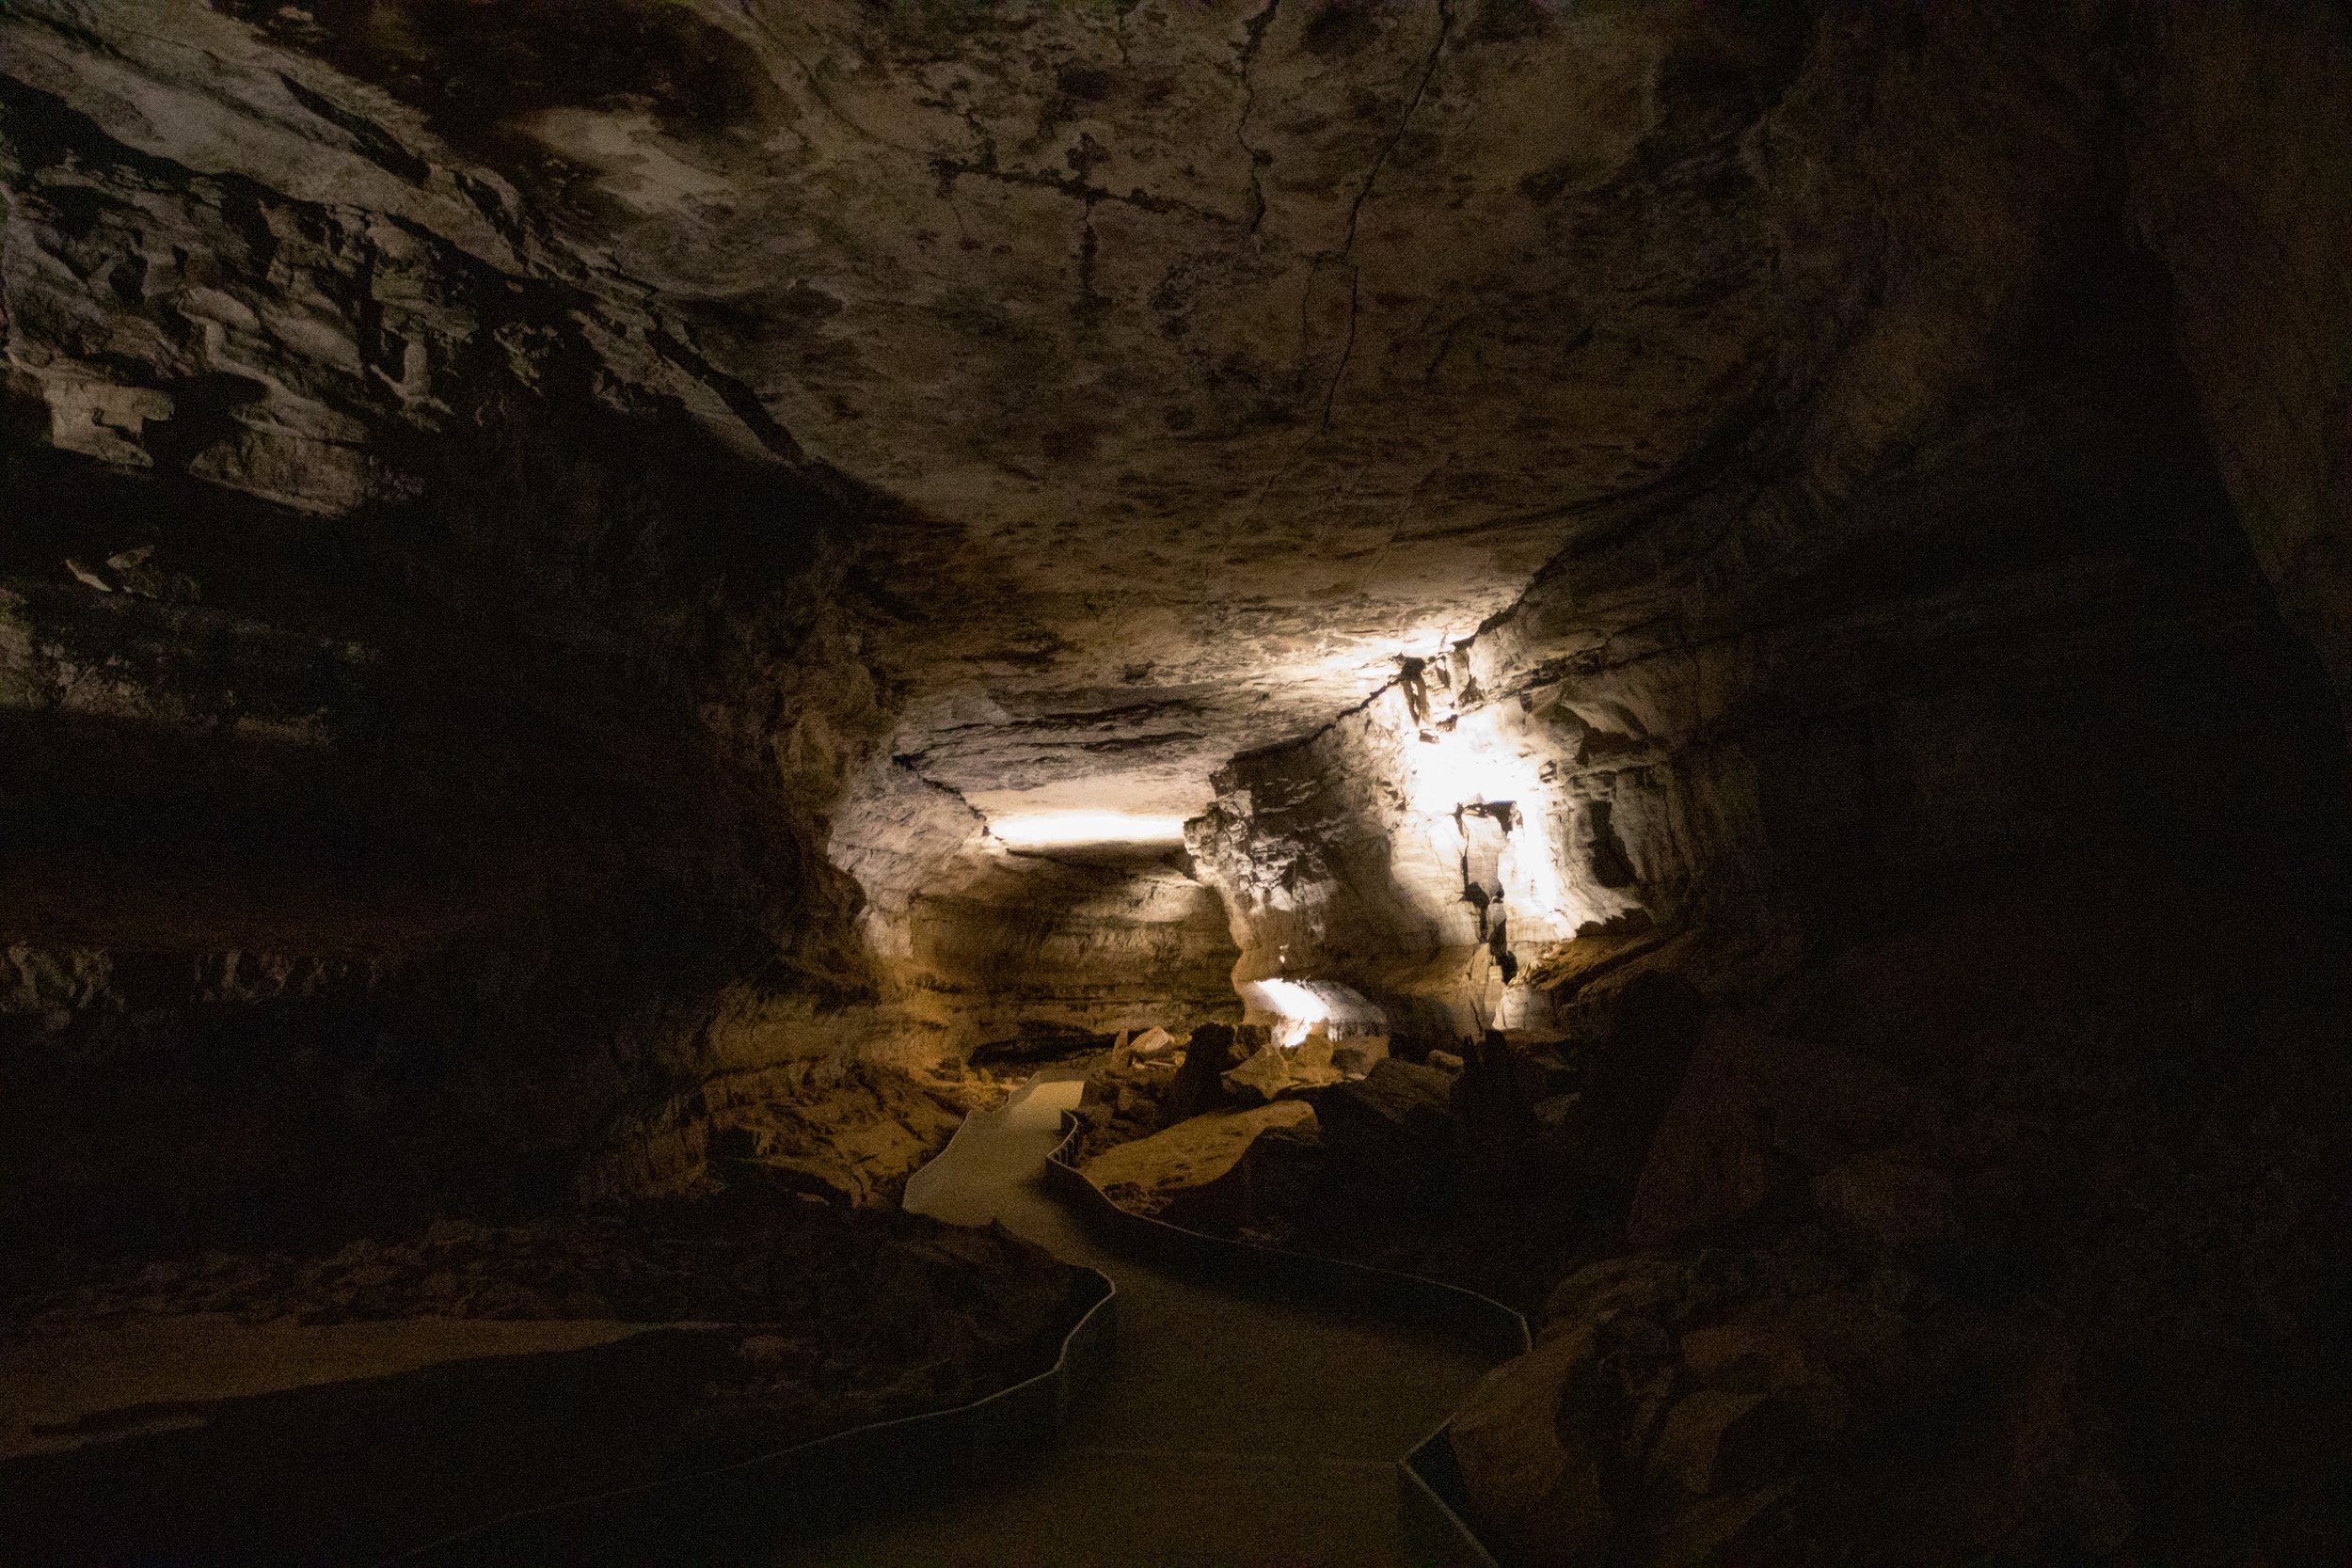 A view inside of a cave system in Mammoth Cave.